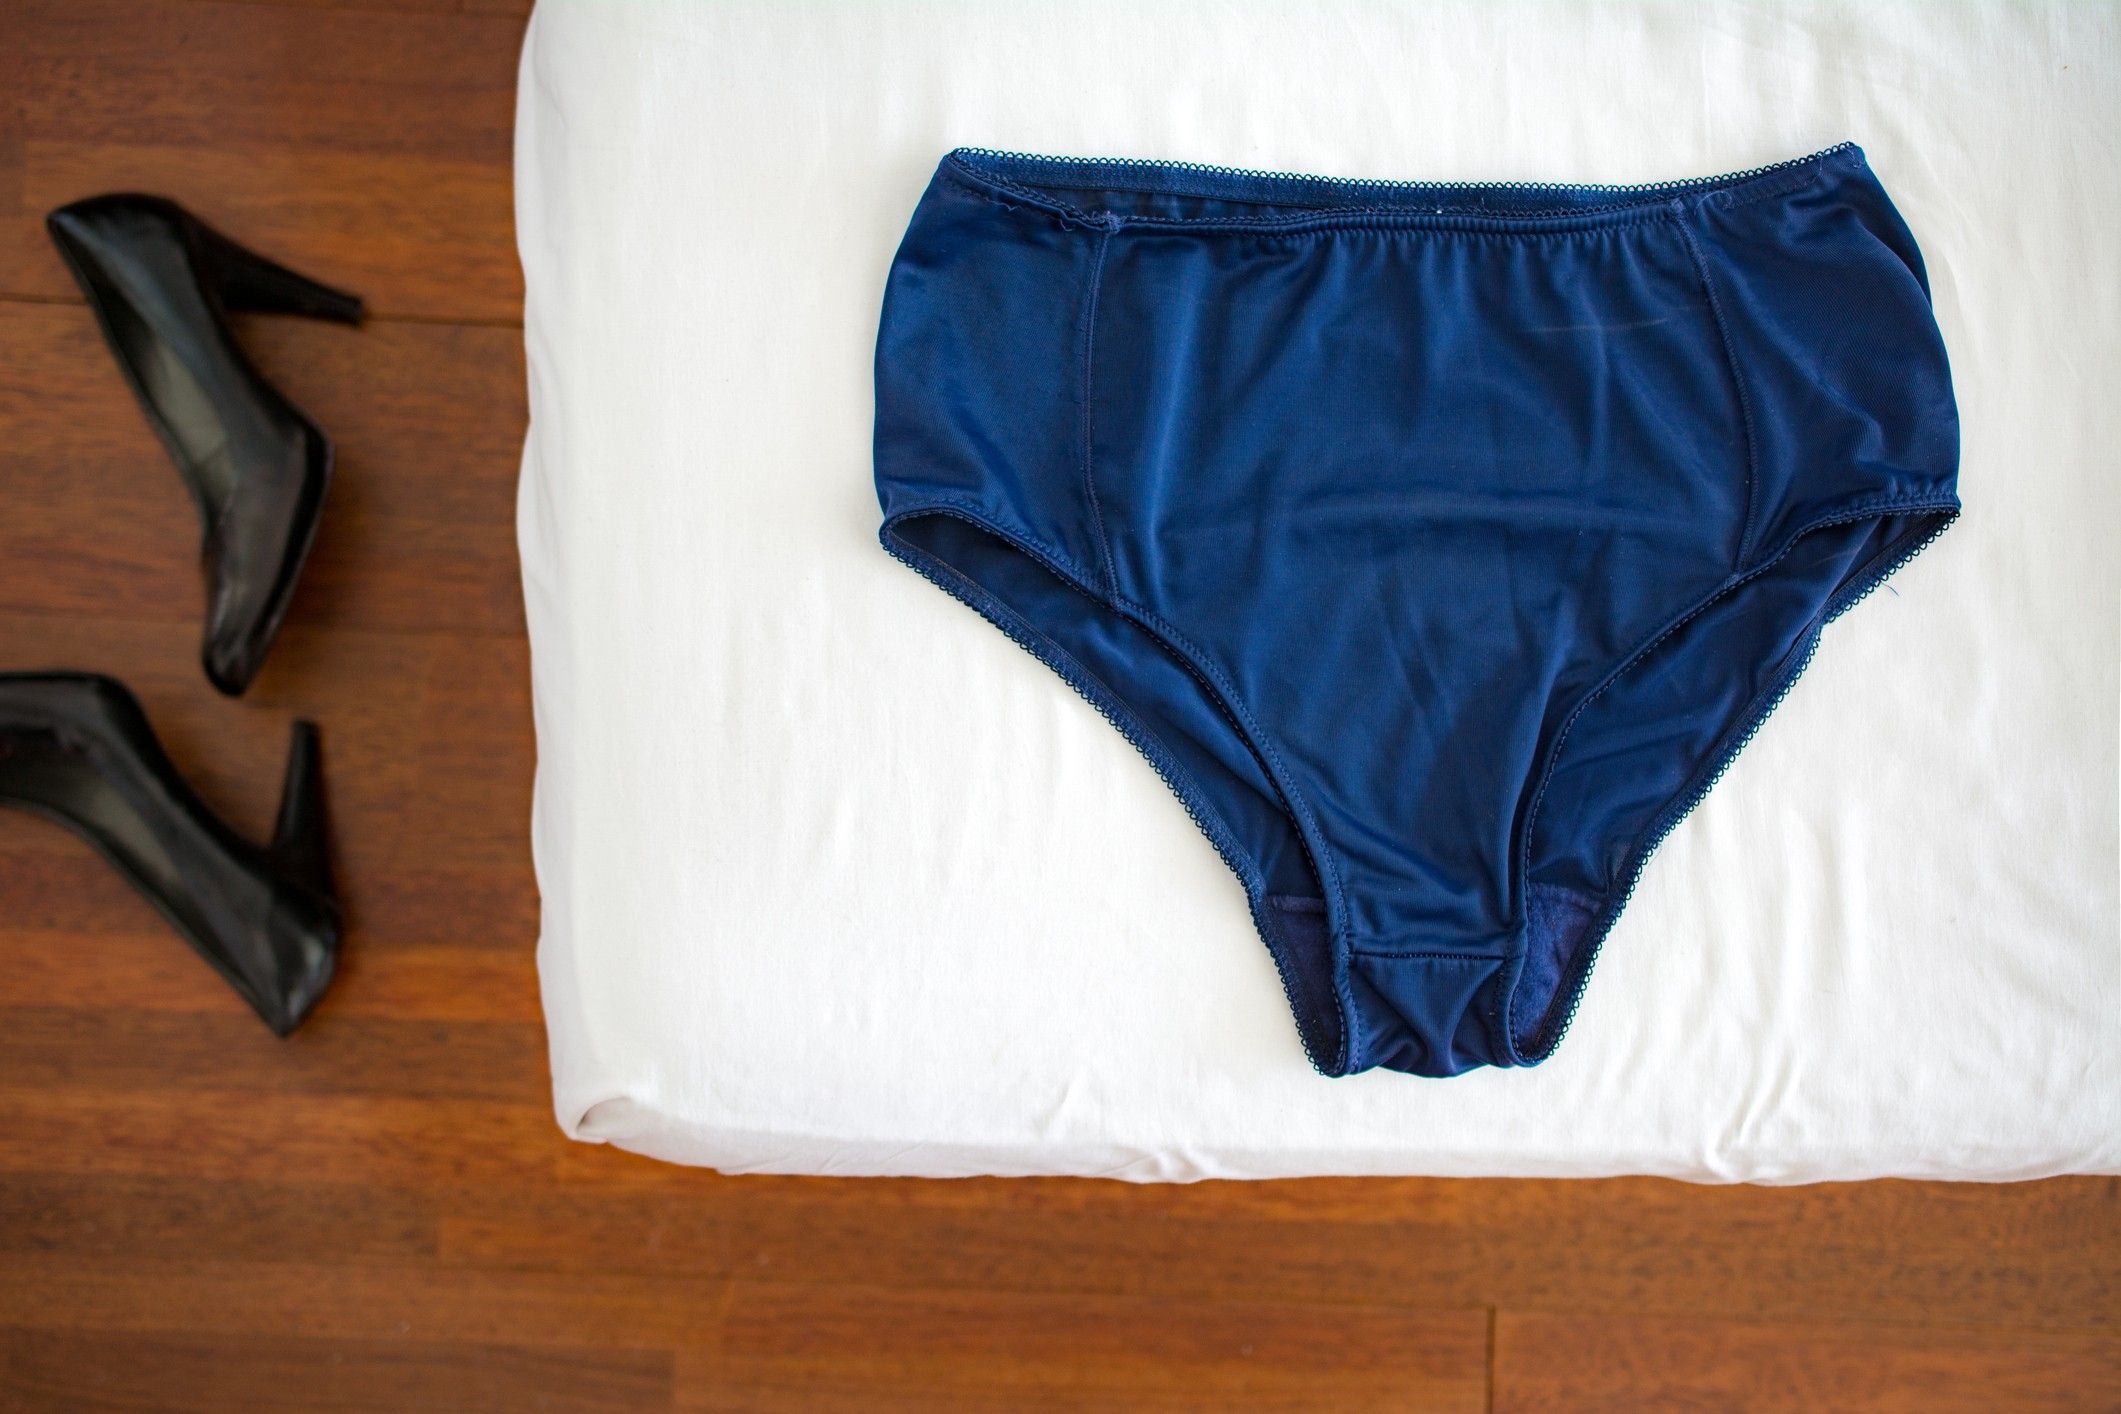 10 Women On Why They Stopped Wearing Panties Underwear pic pic